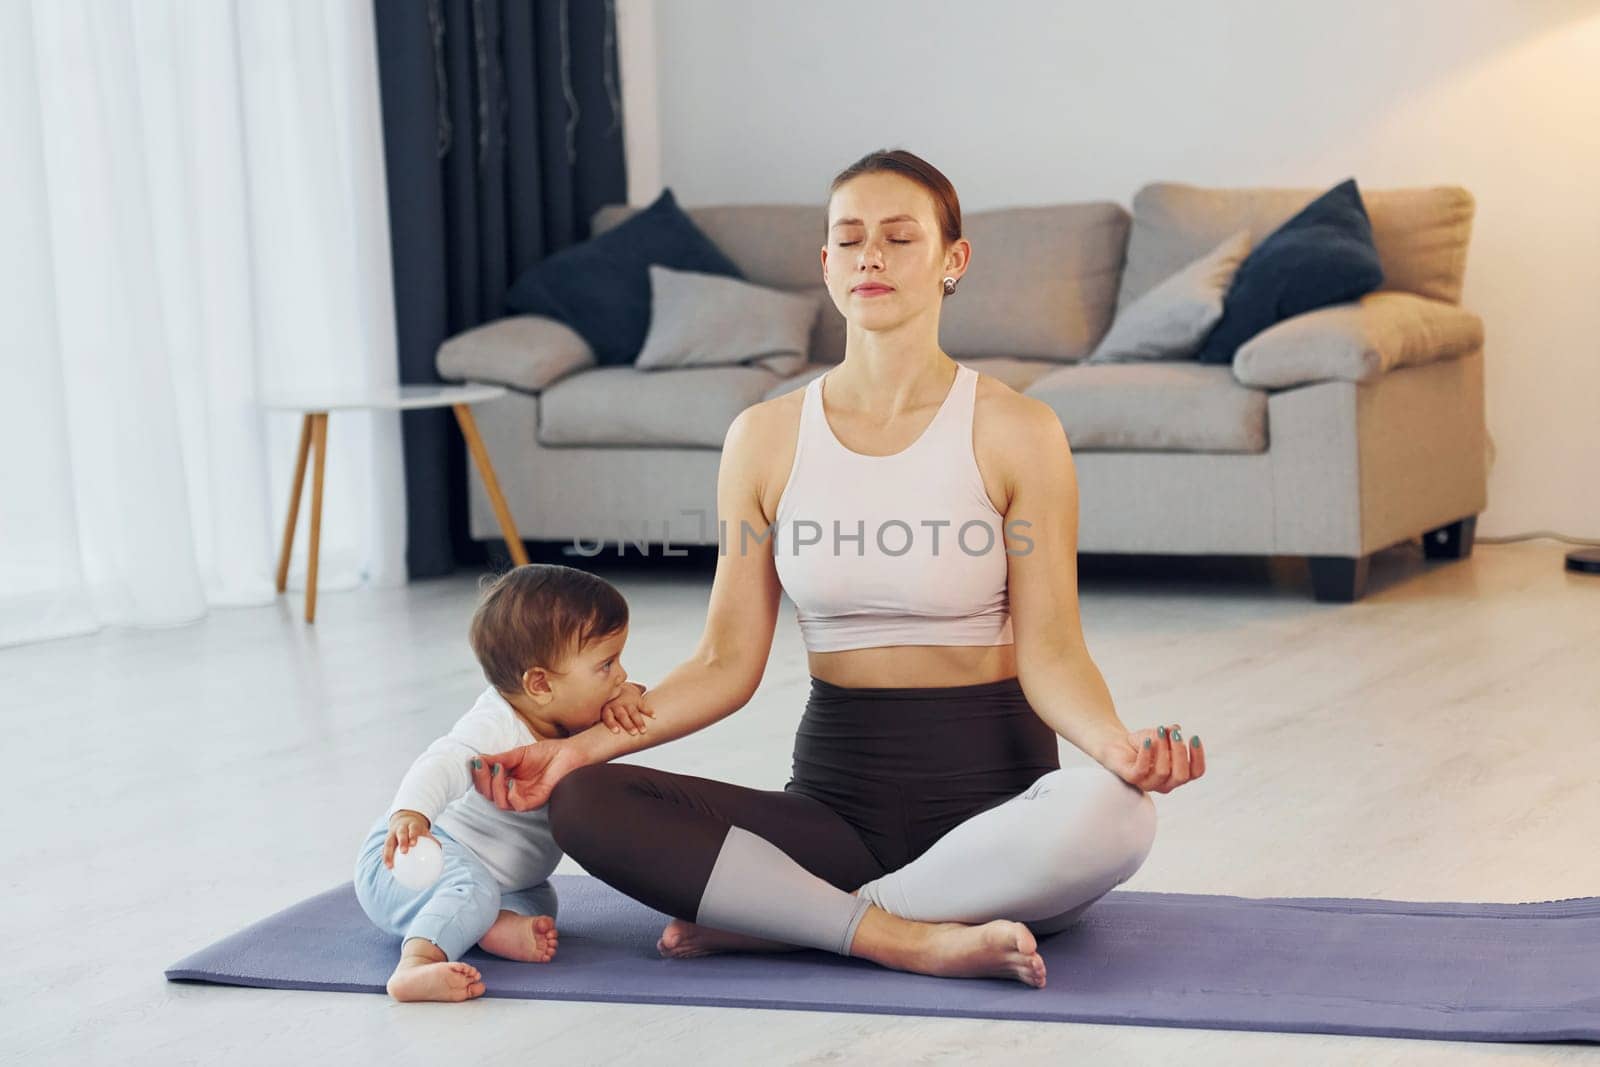 Doing exercises on the mat. Mother with her little daughter is at home together.